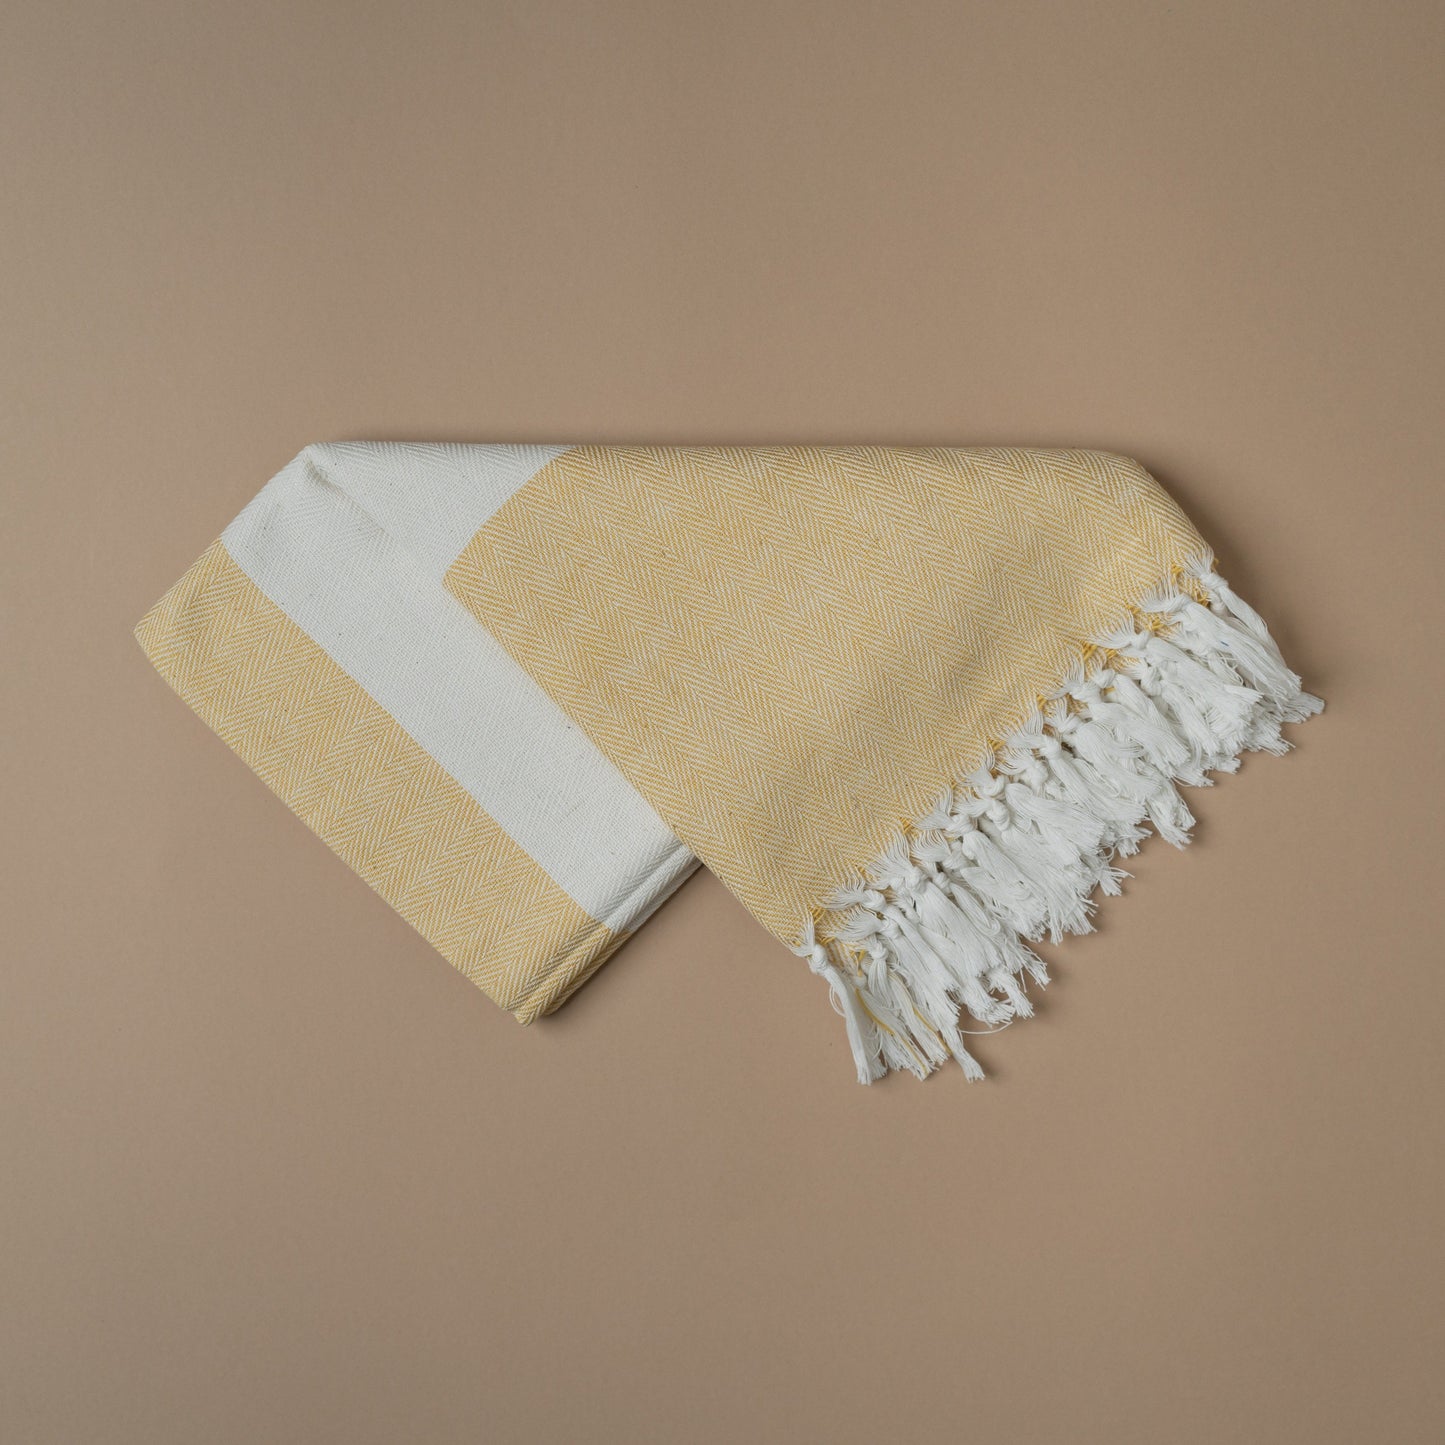 Eco-Friendly Organic Bath Towel with Plant-Based Dyes • Pomegranate yellow •